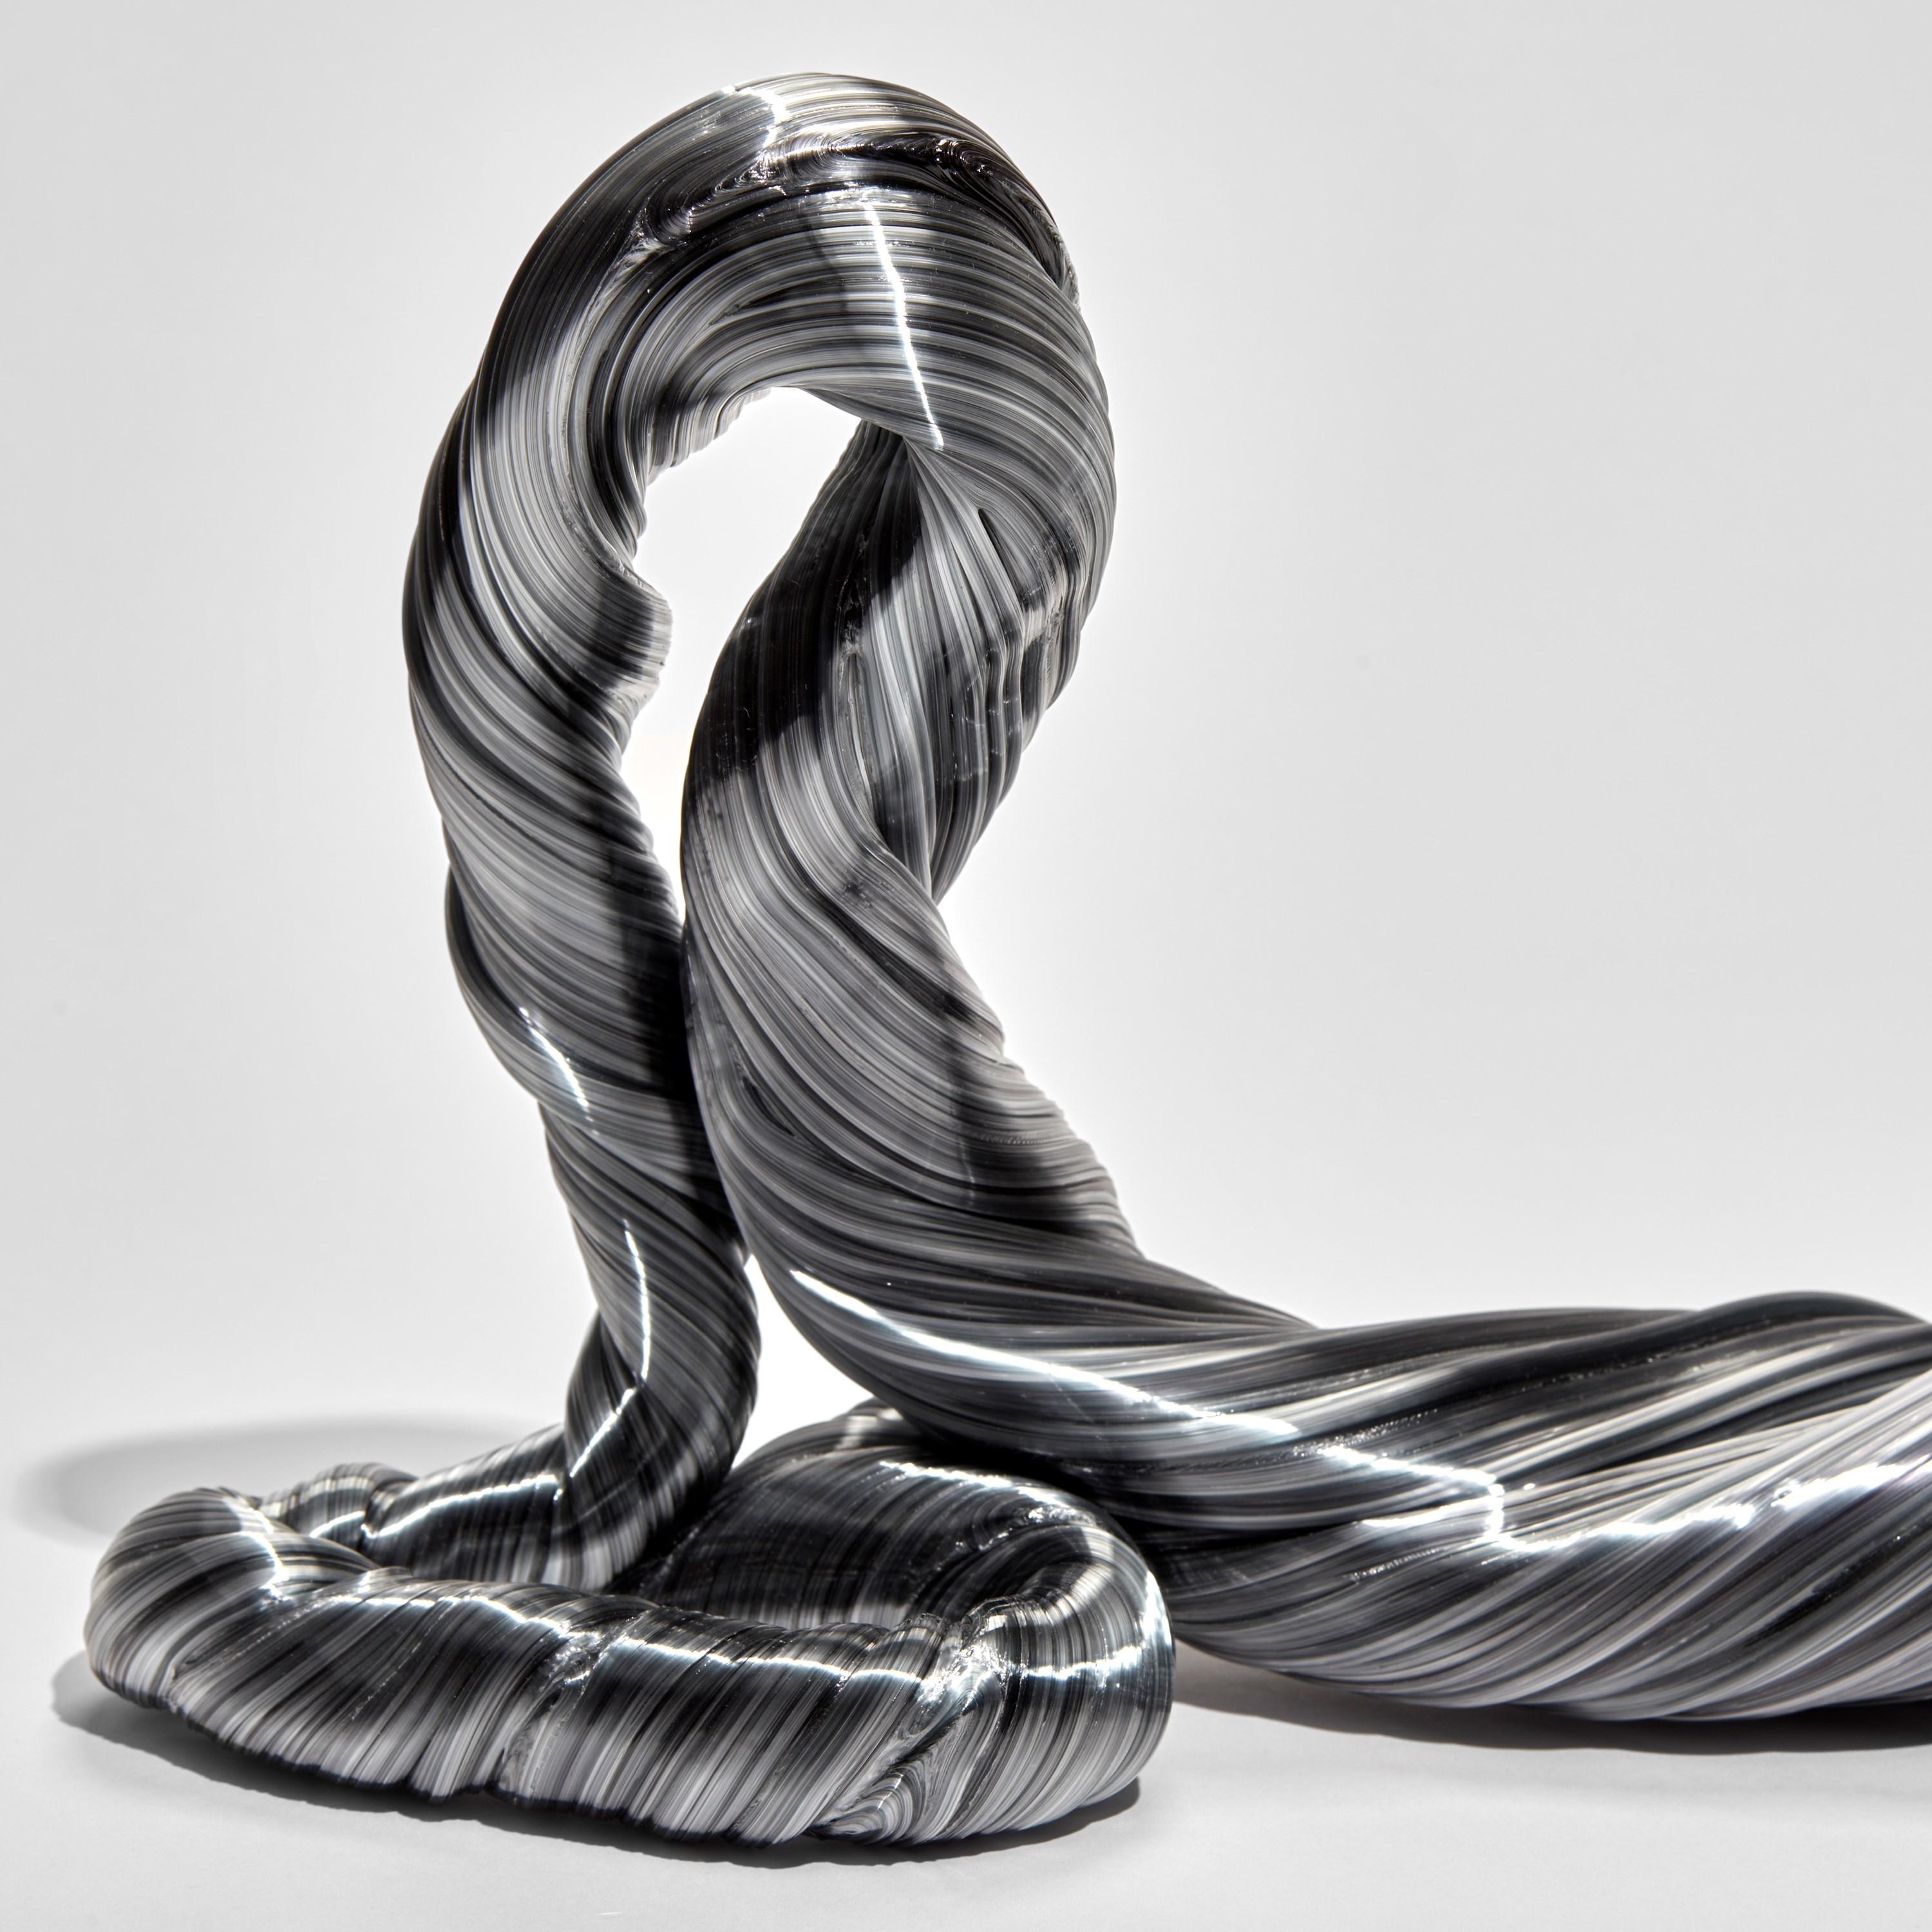 Hand-Crafted Nonlinear in Black, a Unique Abstract Glass Sculpture by Maria Bang Espersen For Sale